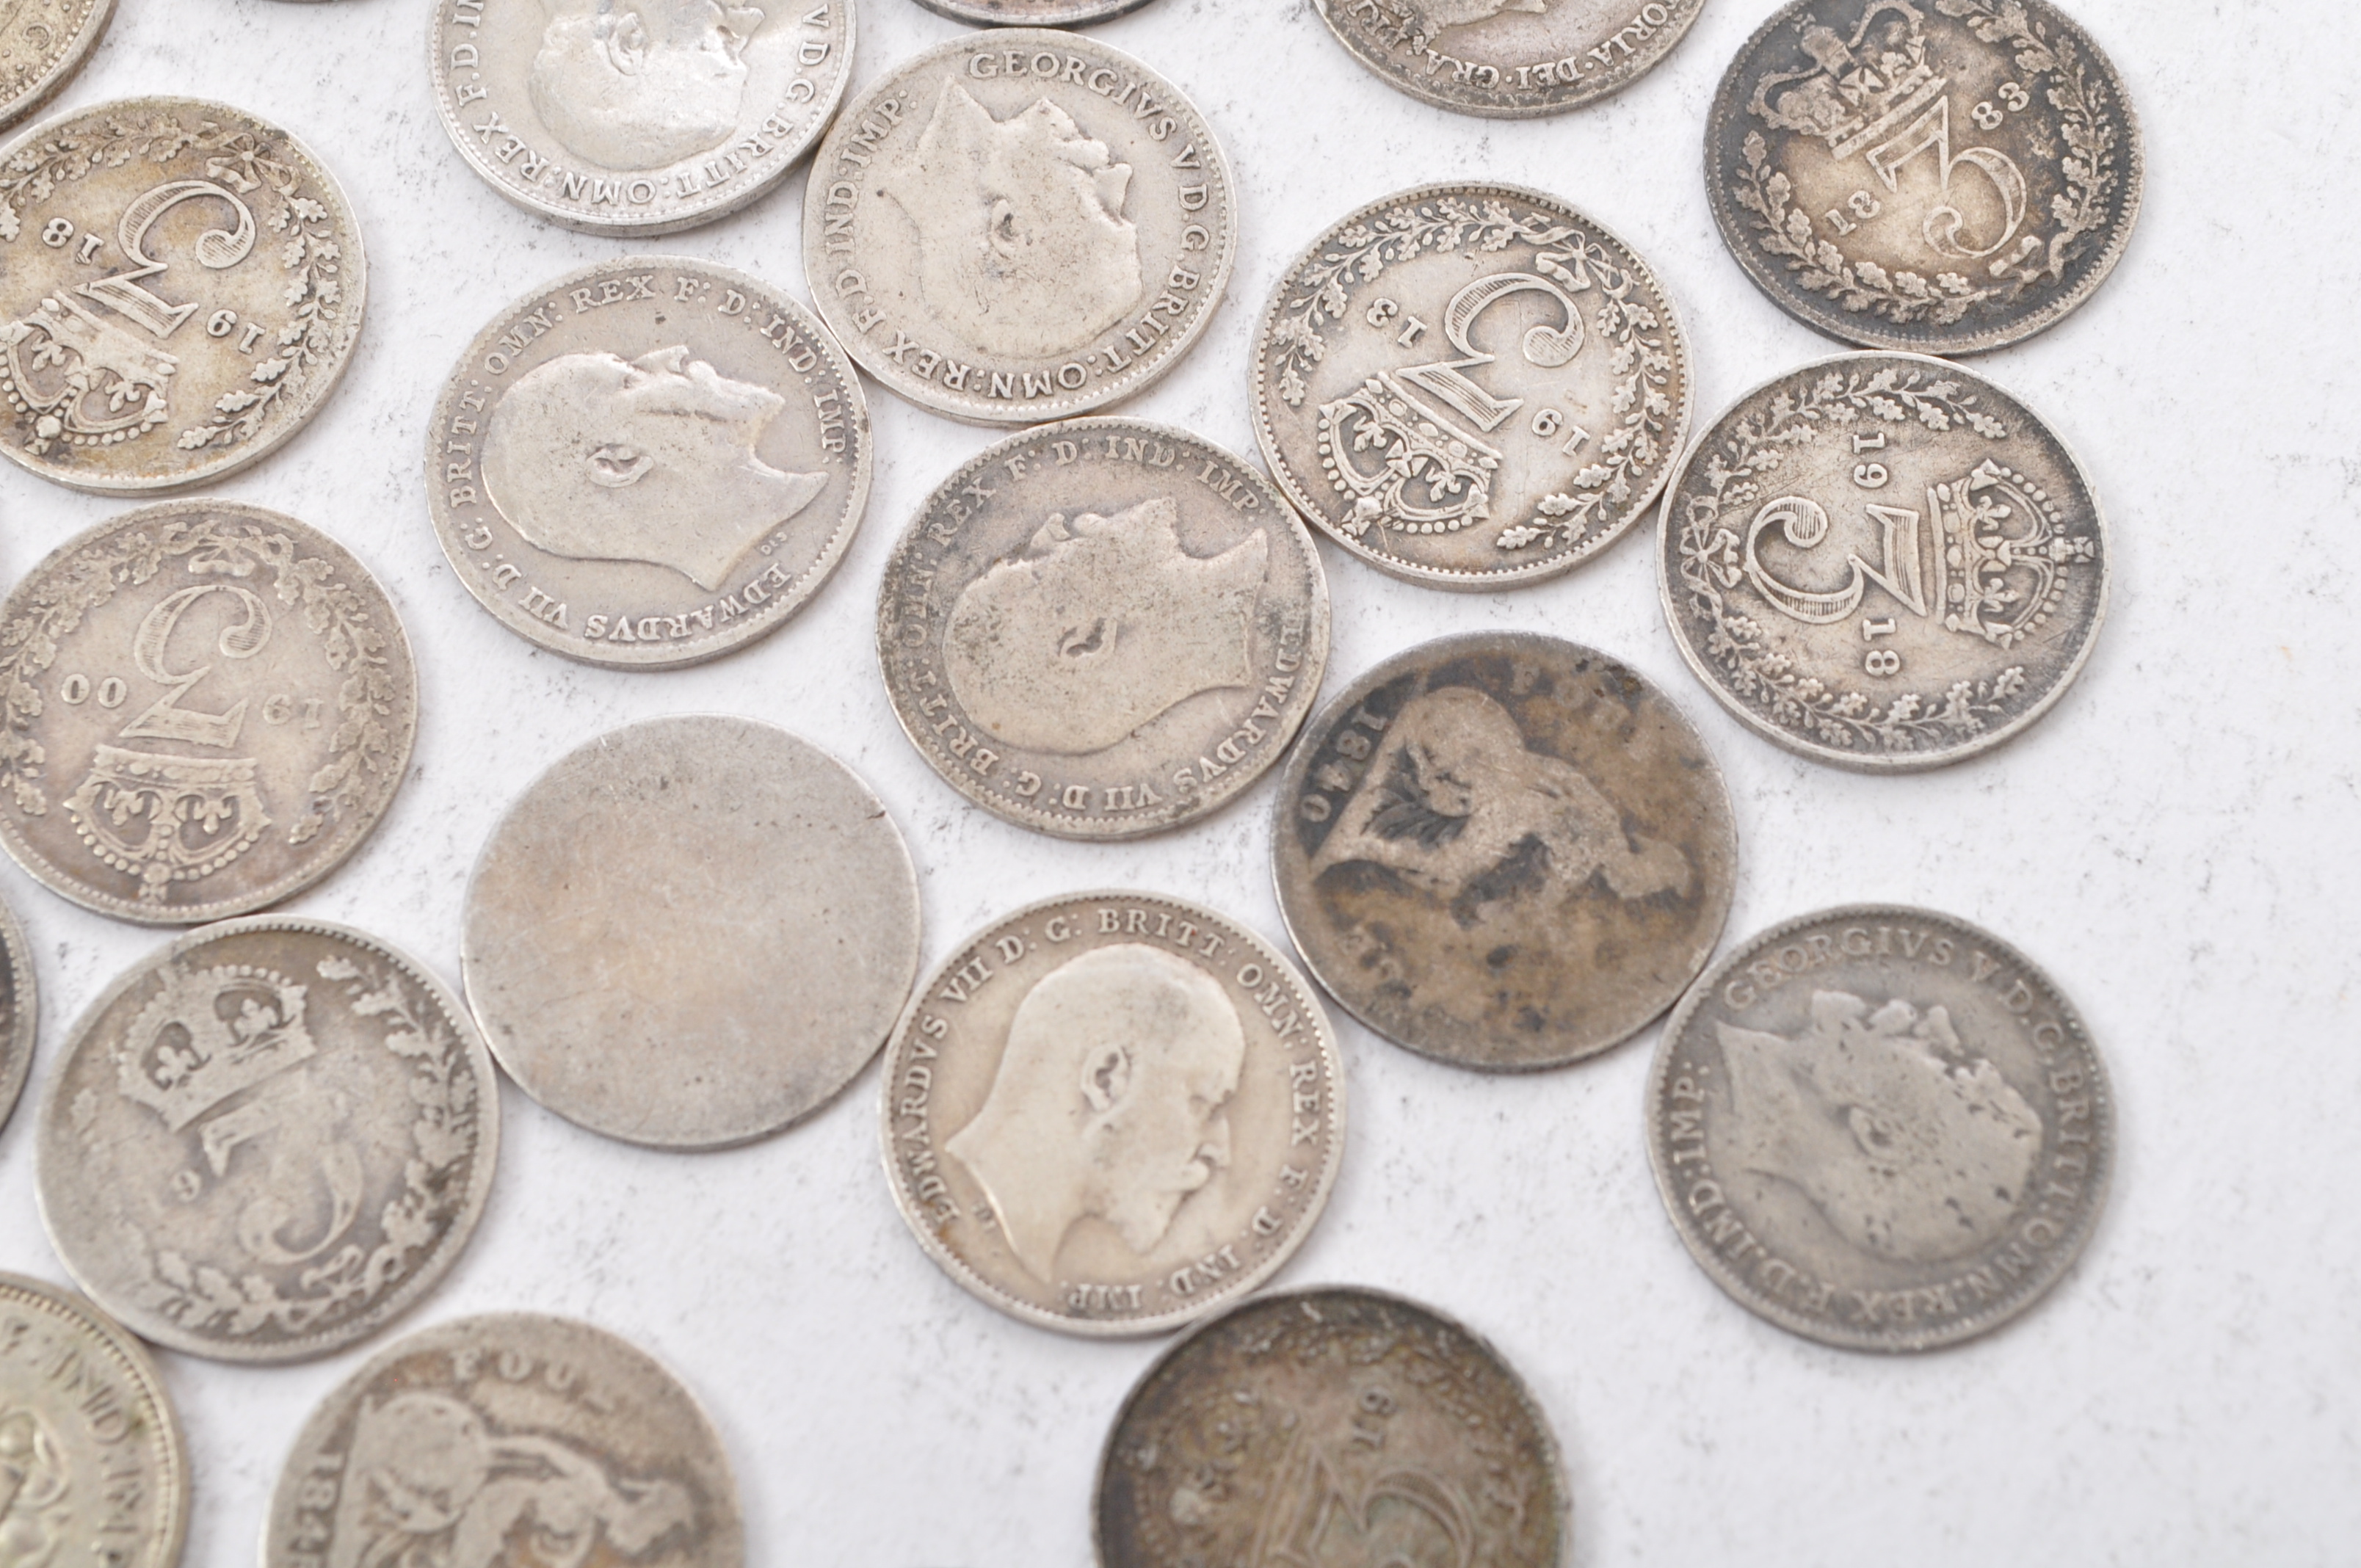 19TH AND 20TH CENTURY SILVER THREE PENCE COINS - Image 8 of 8